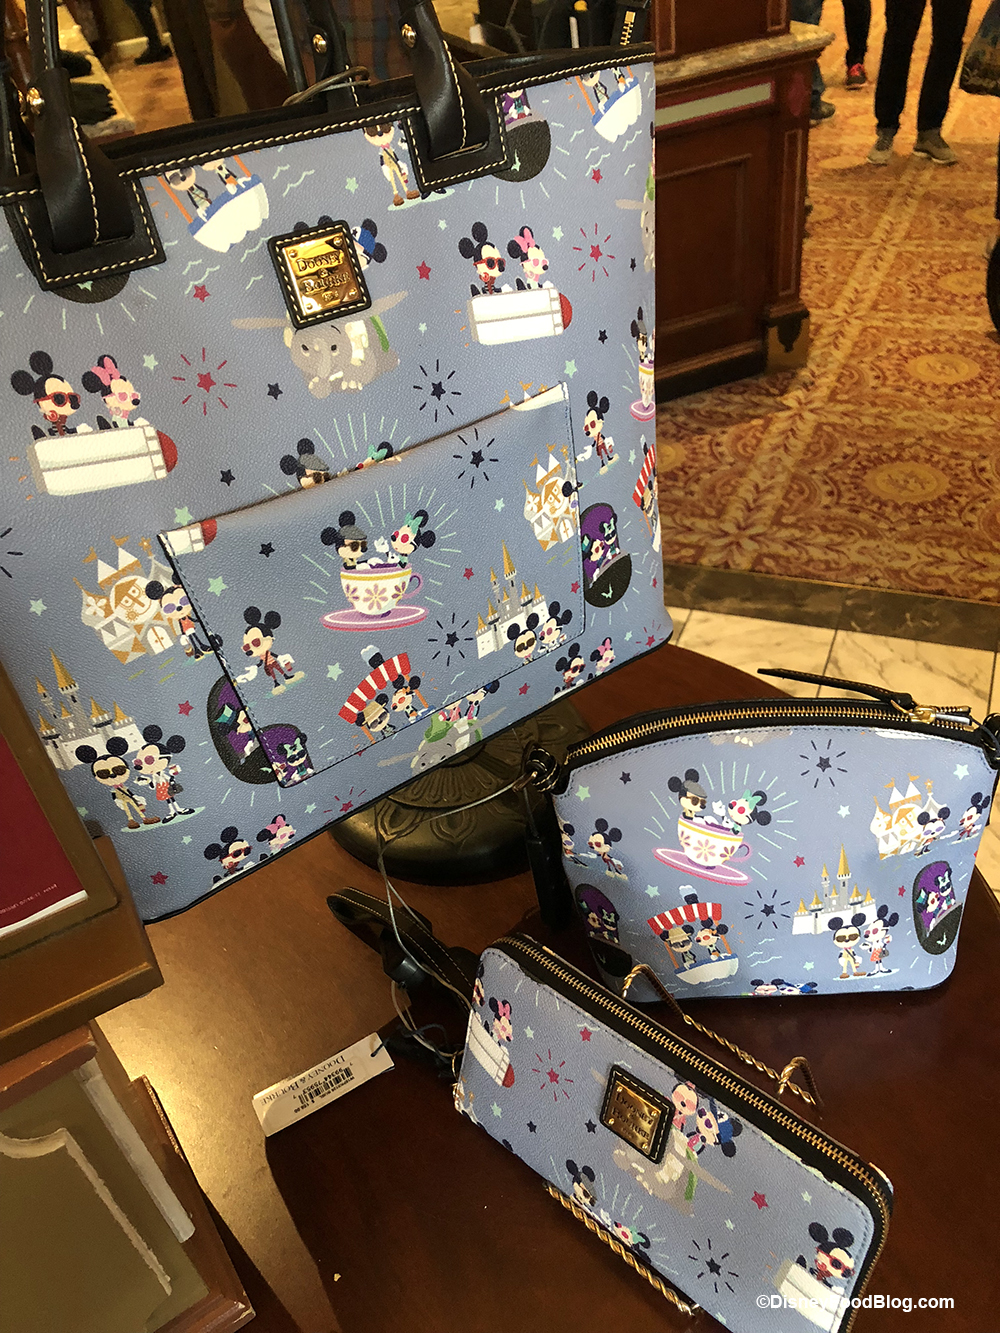 2023 EPCOT Mickey and Minnie Mouse The Picnic Dooney & Bourke Tote Bag-1 